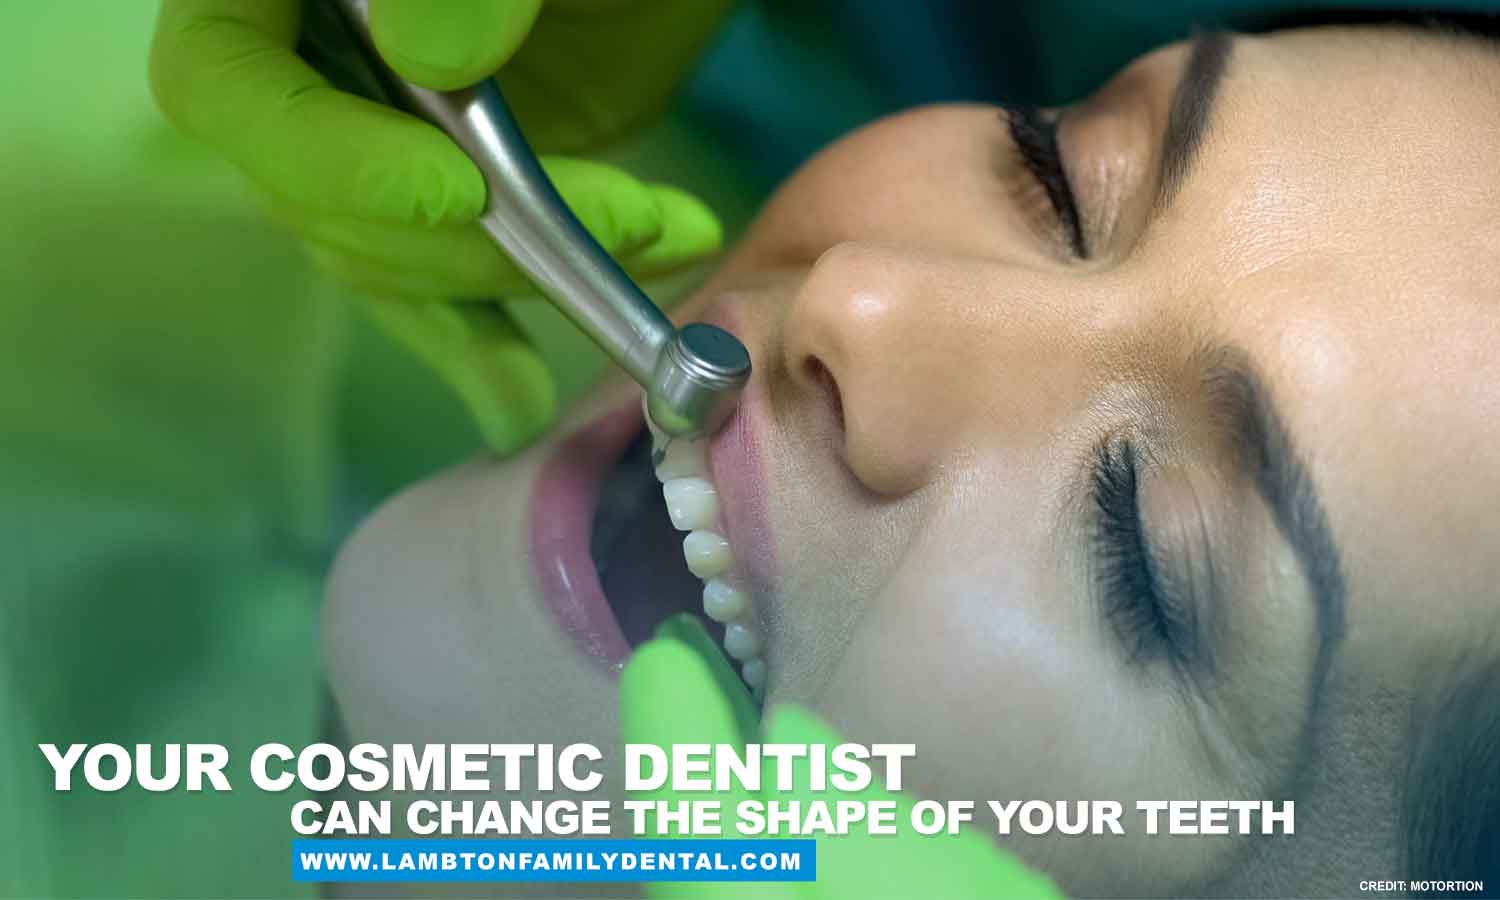 cosmetic dentist can change the shape of your teeth